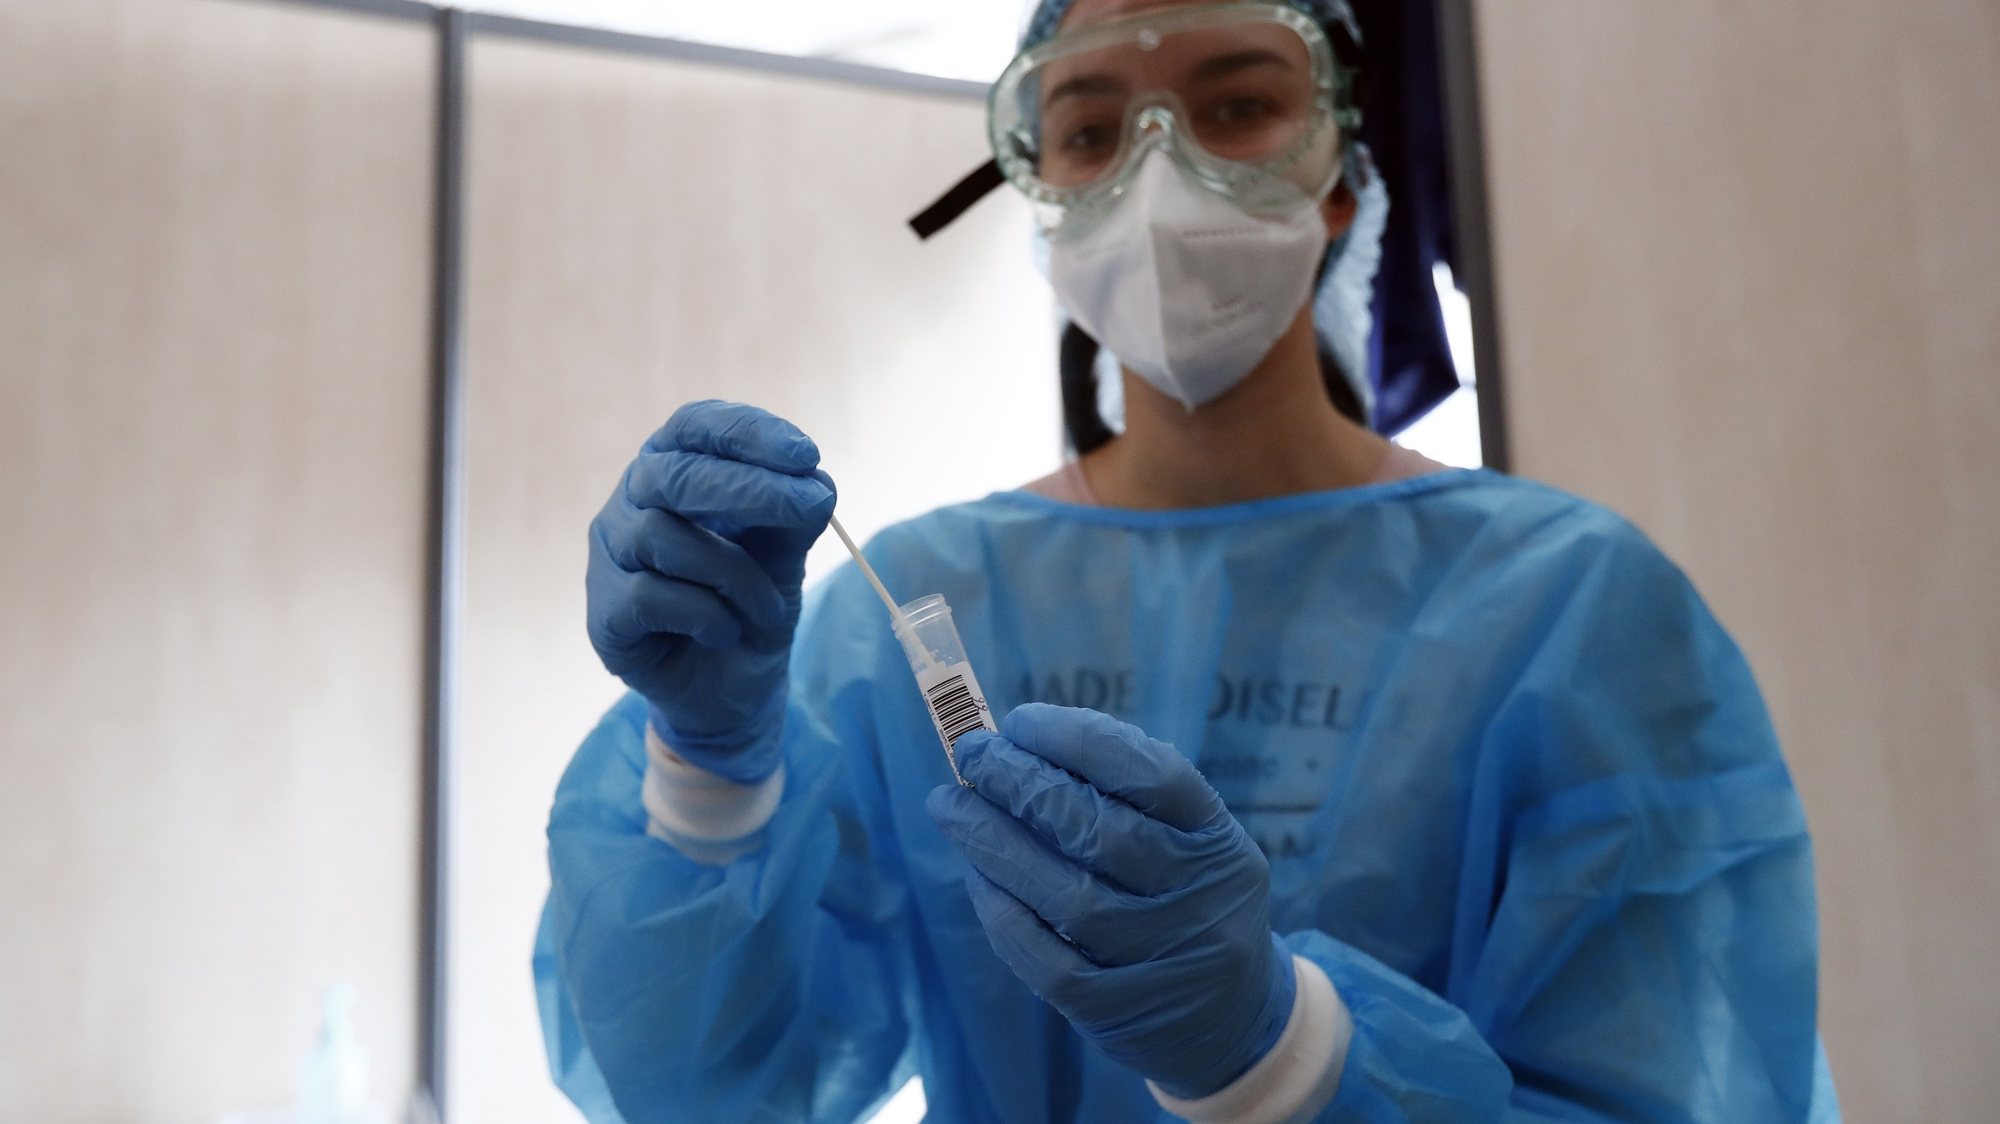 epa08998581 A medical worker takes nasal swab samples at a test station for Covid-19 coronavirus in Montpellier, France, 09 February 2021. The top French medical authority (Haute autorite de Sante) has approved the vaccine AstraZeneca-Oxford for use in France, but only for people under 65, echoing decisions made in Sweden, Germany, Belgium and Switzerland over concerns about a lack of data on the effectiveness of the vaccine for over 65s.  EPA/GUILLAUME HORCAJUELO